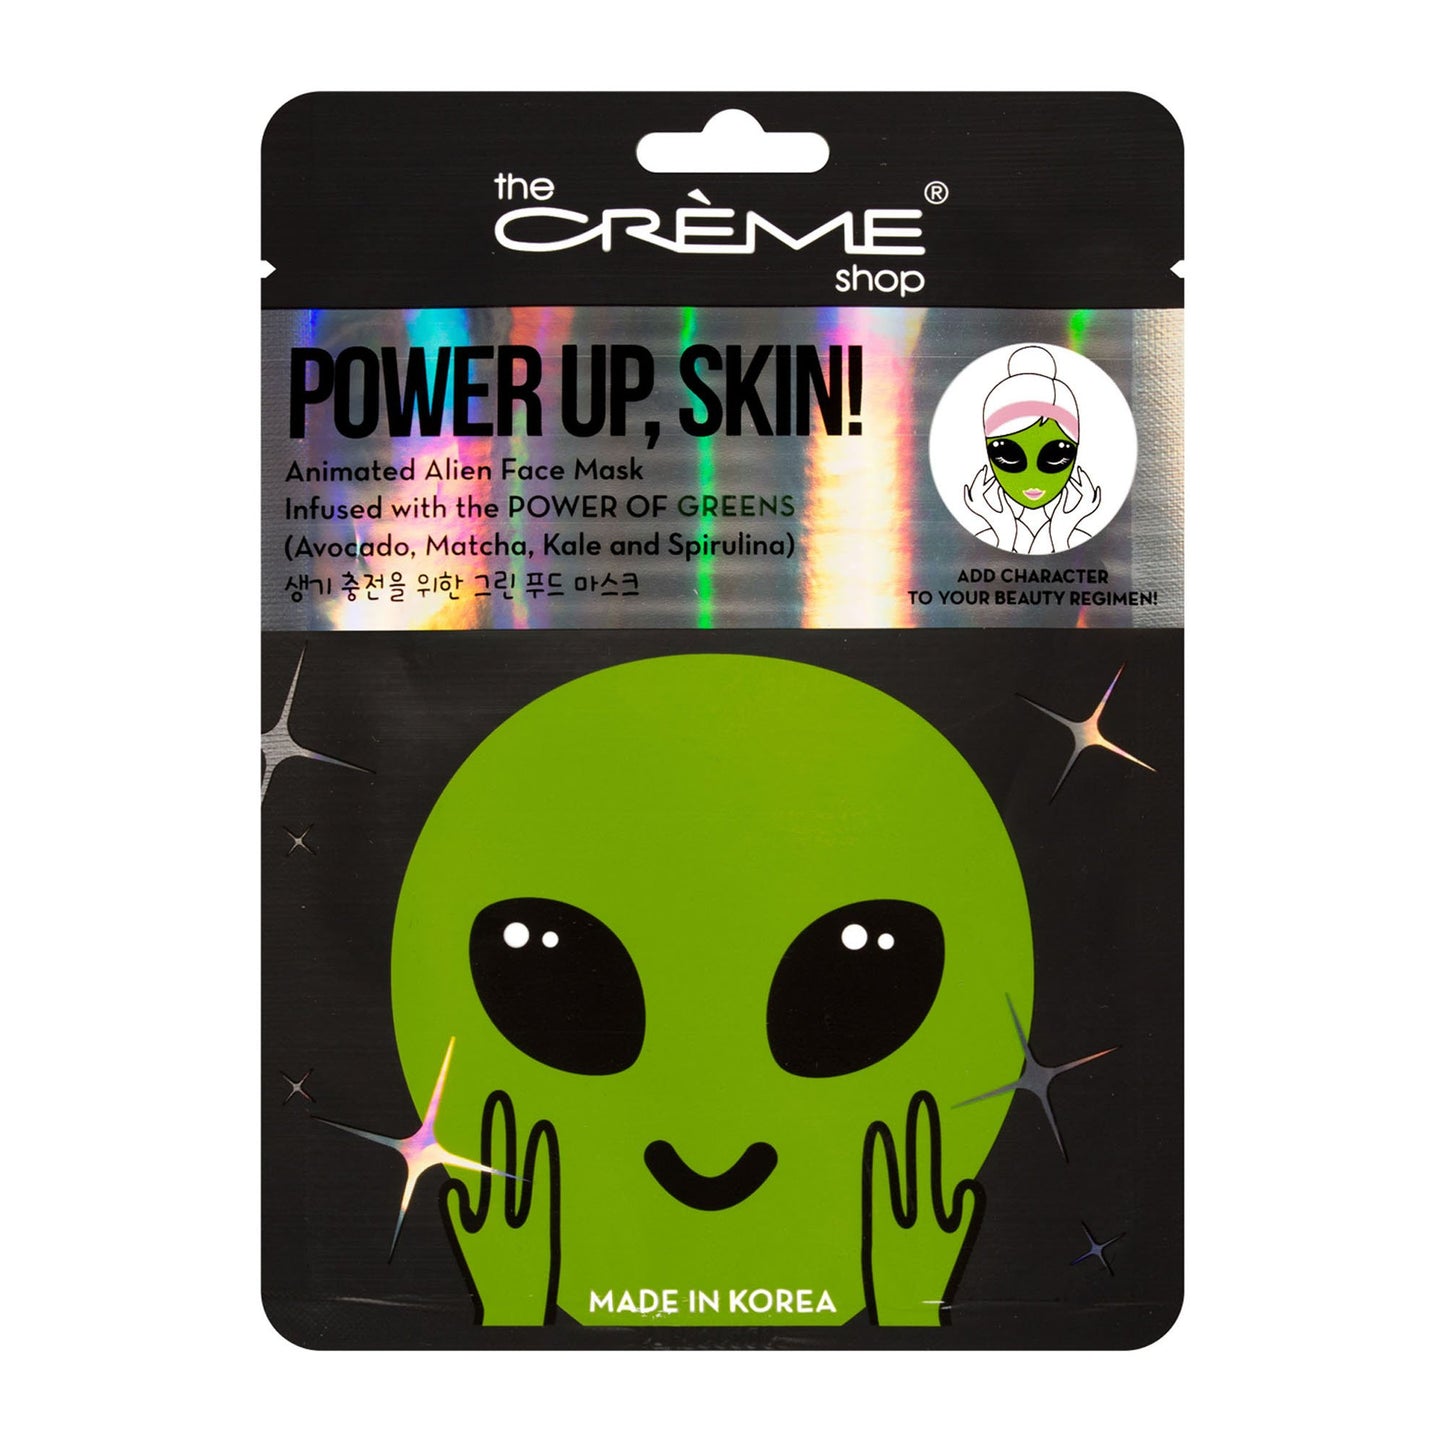 Power Up, Skin! Animated Alien Face Mask - Power of Greens - The Crème Shop